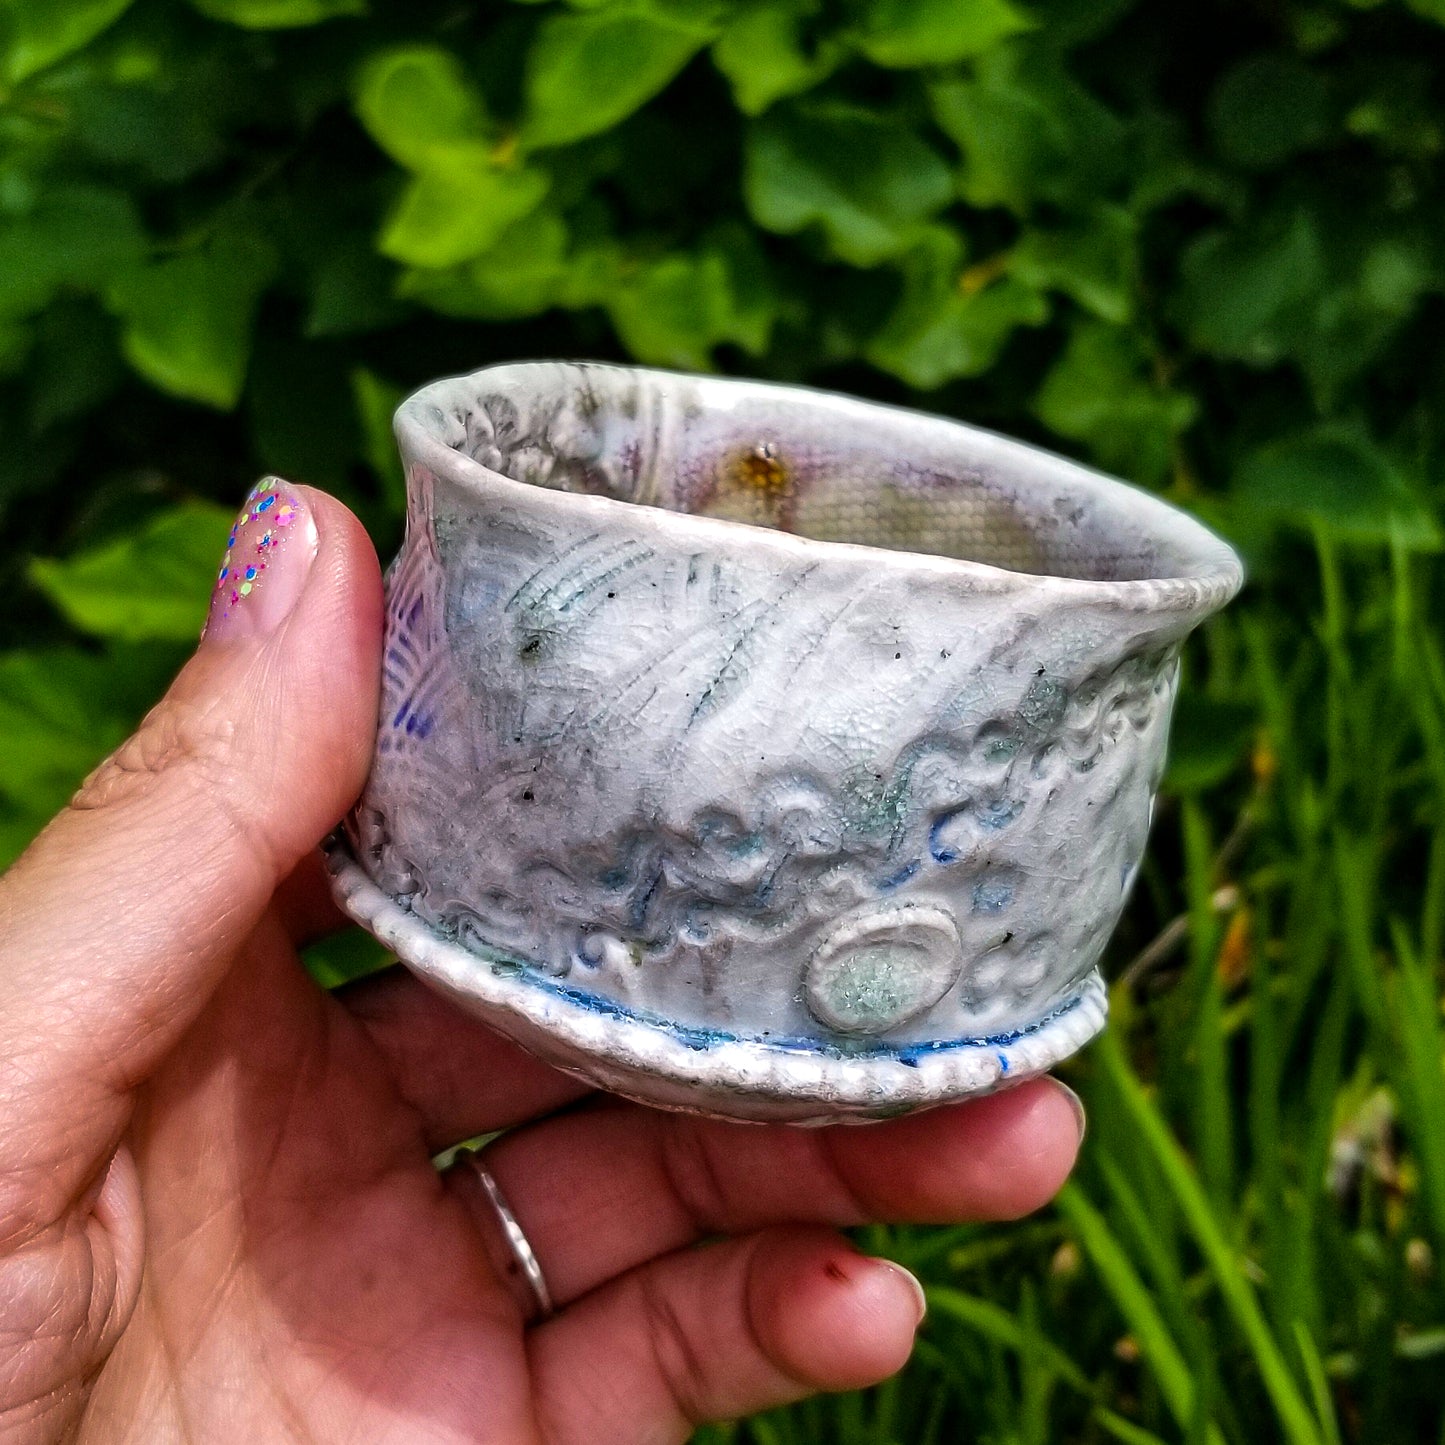 Handmade stoneware ceramic soda fired cup blue color with pressed textures